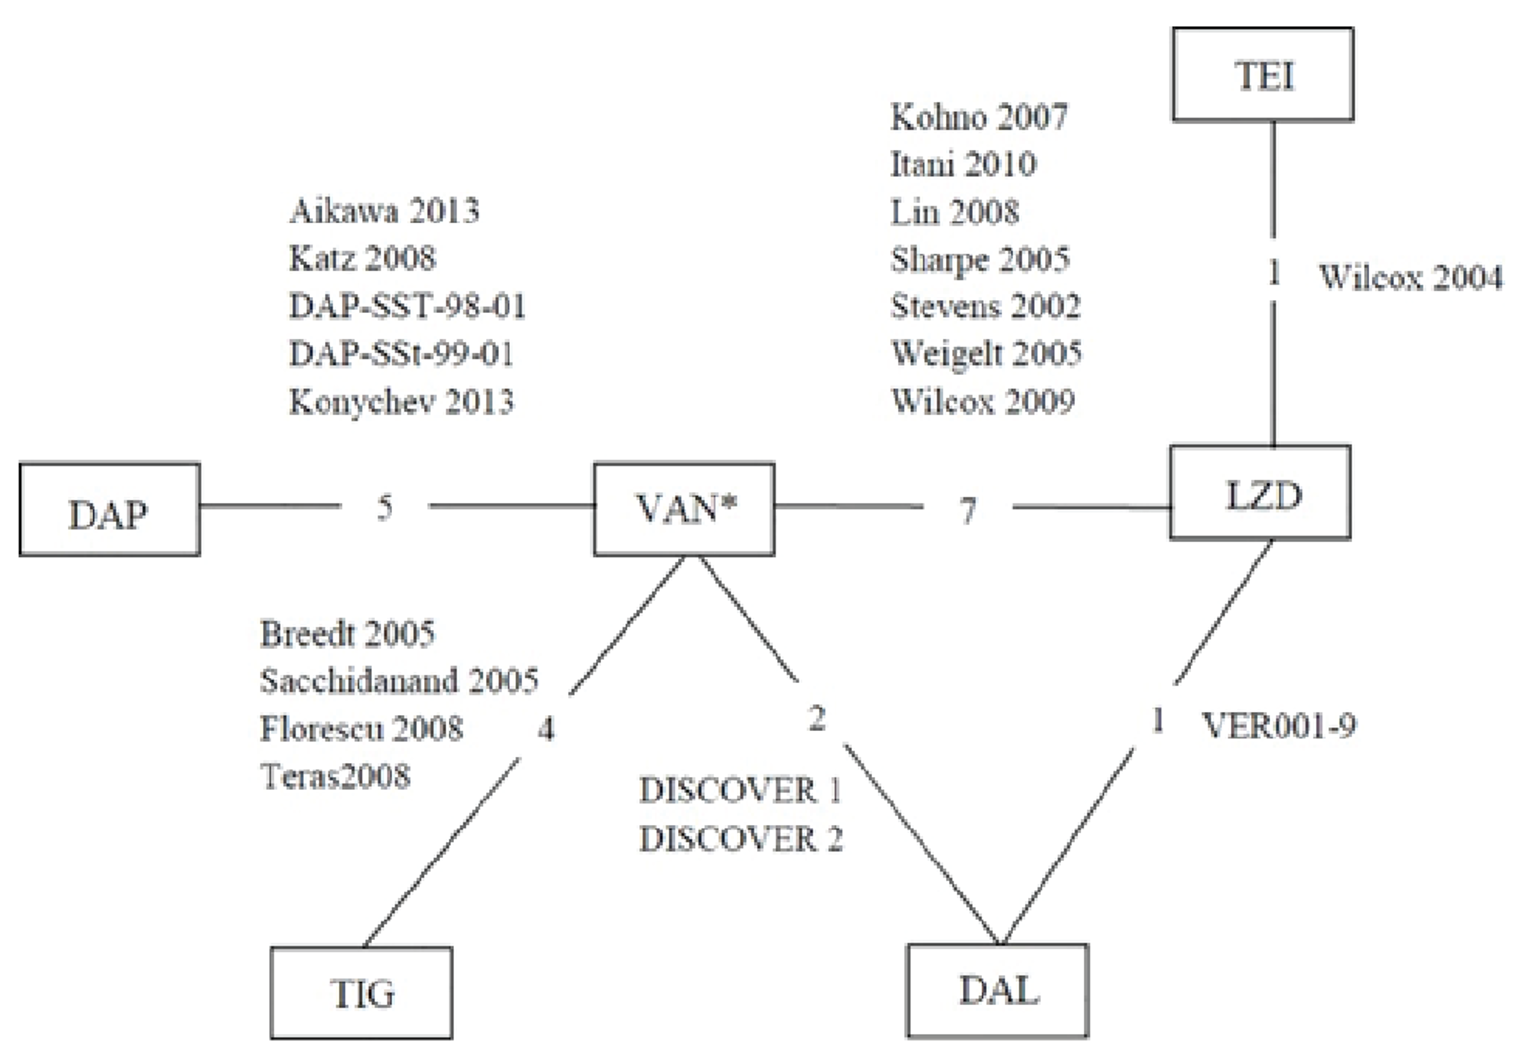 The figure shows the evidence network of all trials included in the NMA. The network includes dalbavancin, vancomycin, daptomycin, linezolid, teicoplanin, and tigecycline, and there is a closed loop for vancomycin, linezolid, and dalbavancin. There are direct comparisons between vancomycin and all the other drugs except teicoplanin.